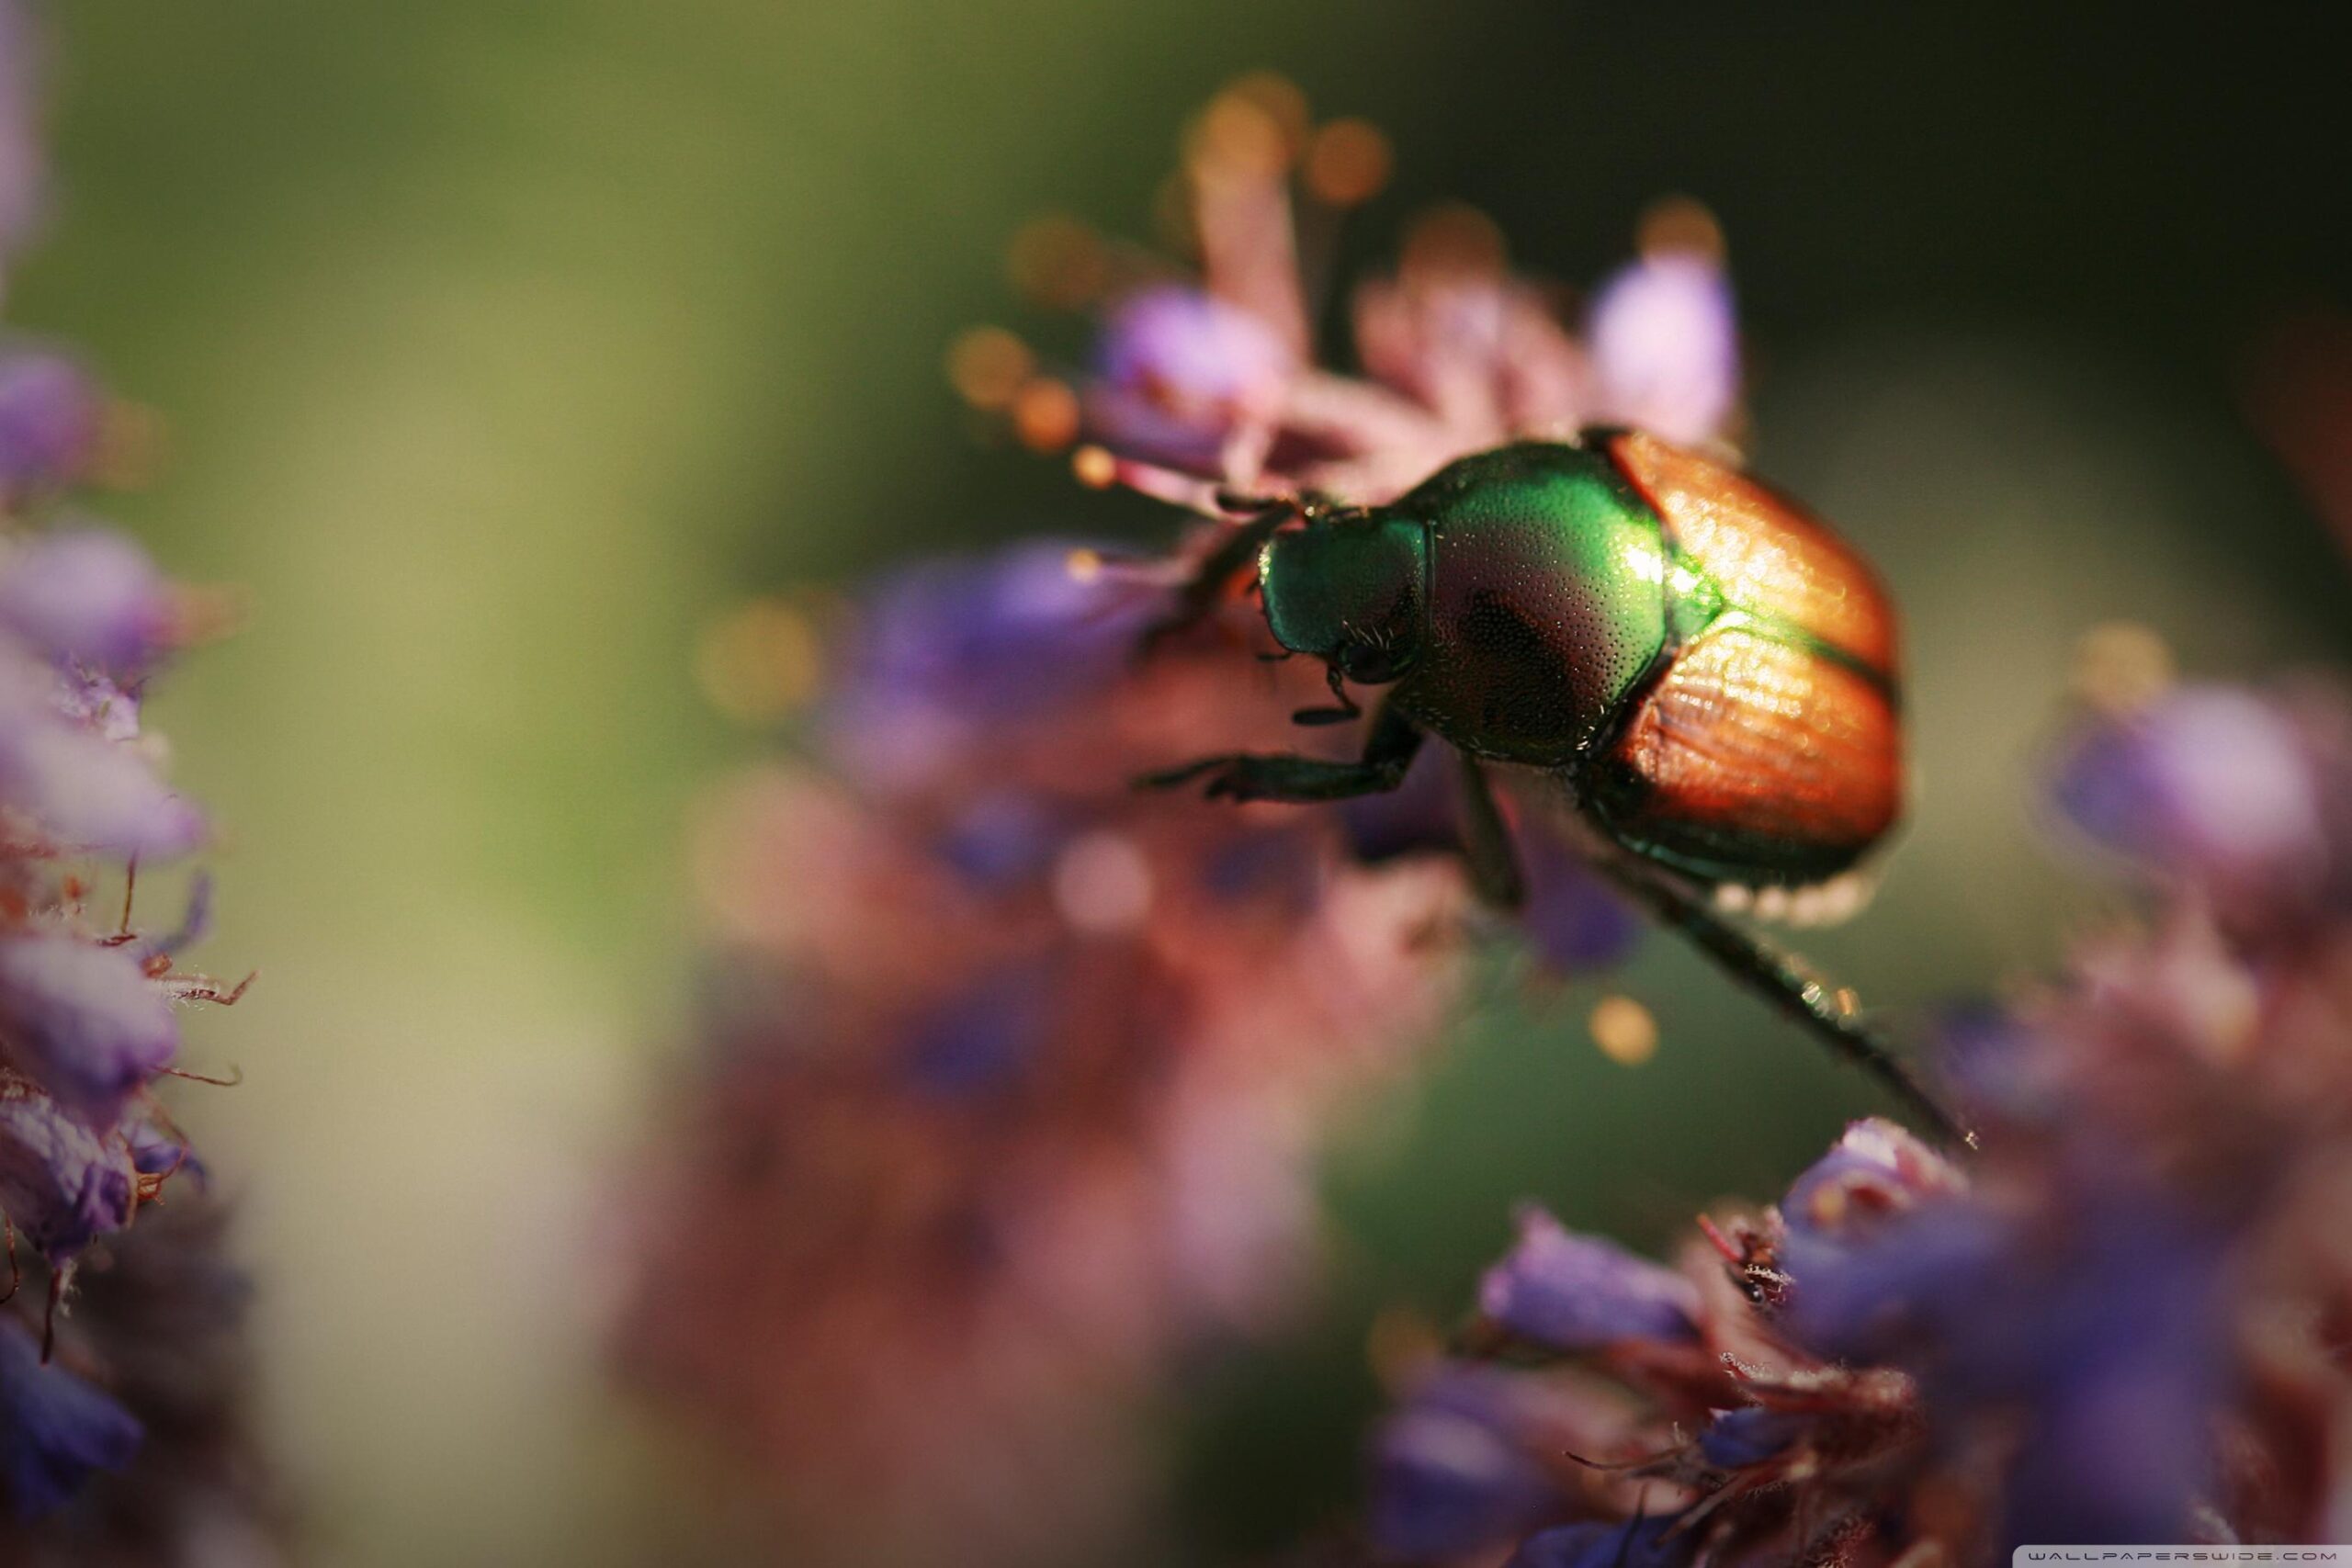 Beetle Insect Desktop Wallpaper Hd, Beetle Insect, Animal